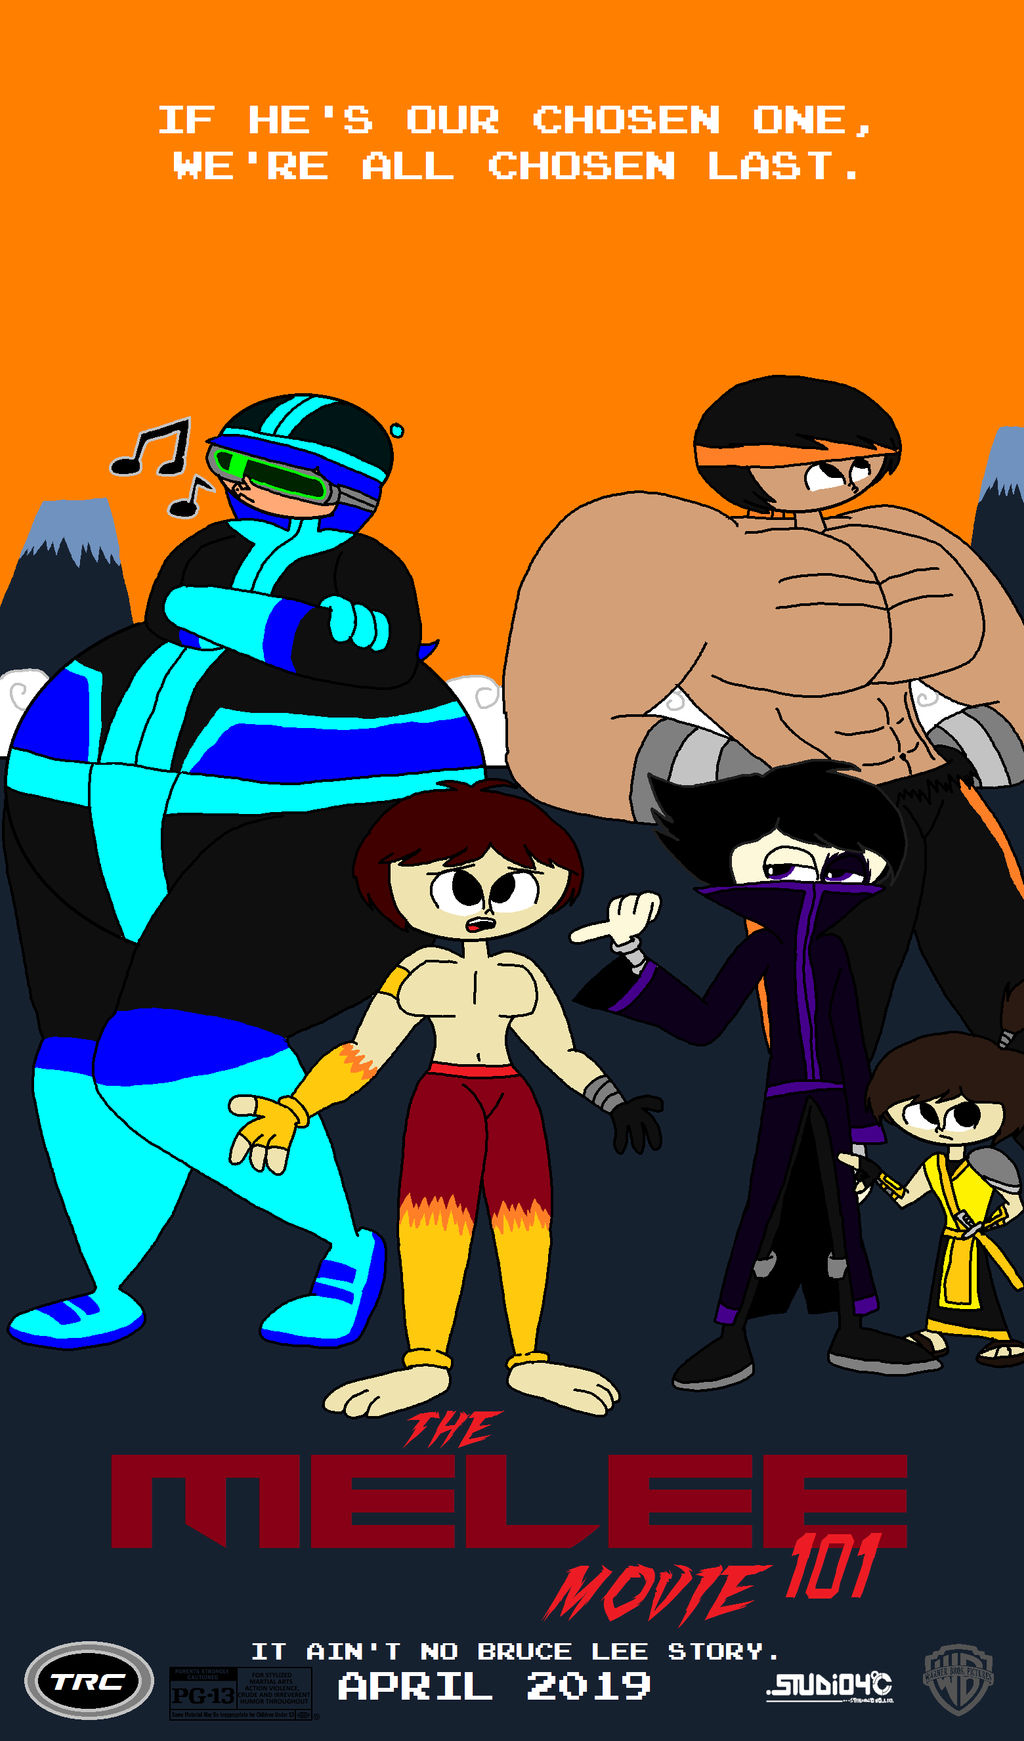 The Toon Bully remake poster by Dimensions101 on DeviantArt